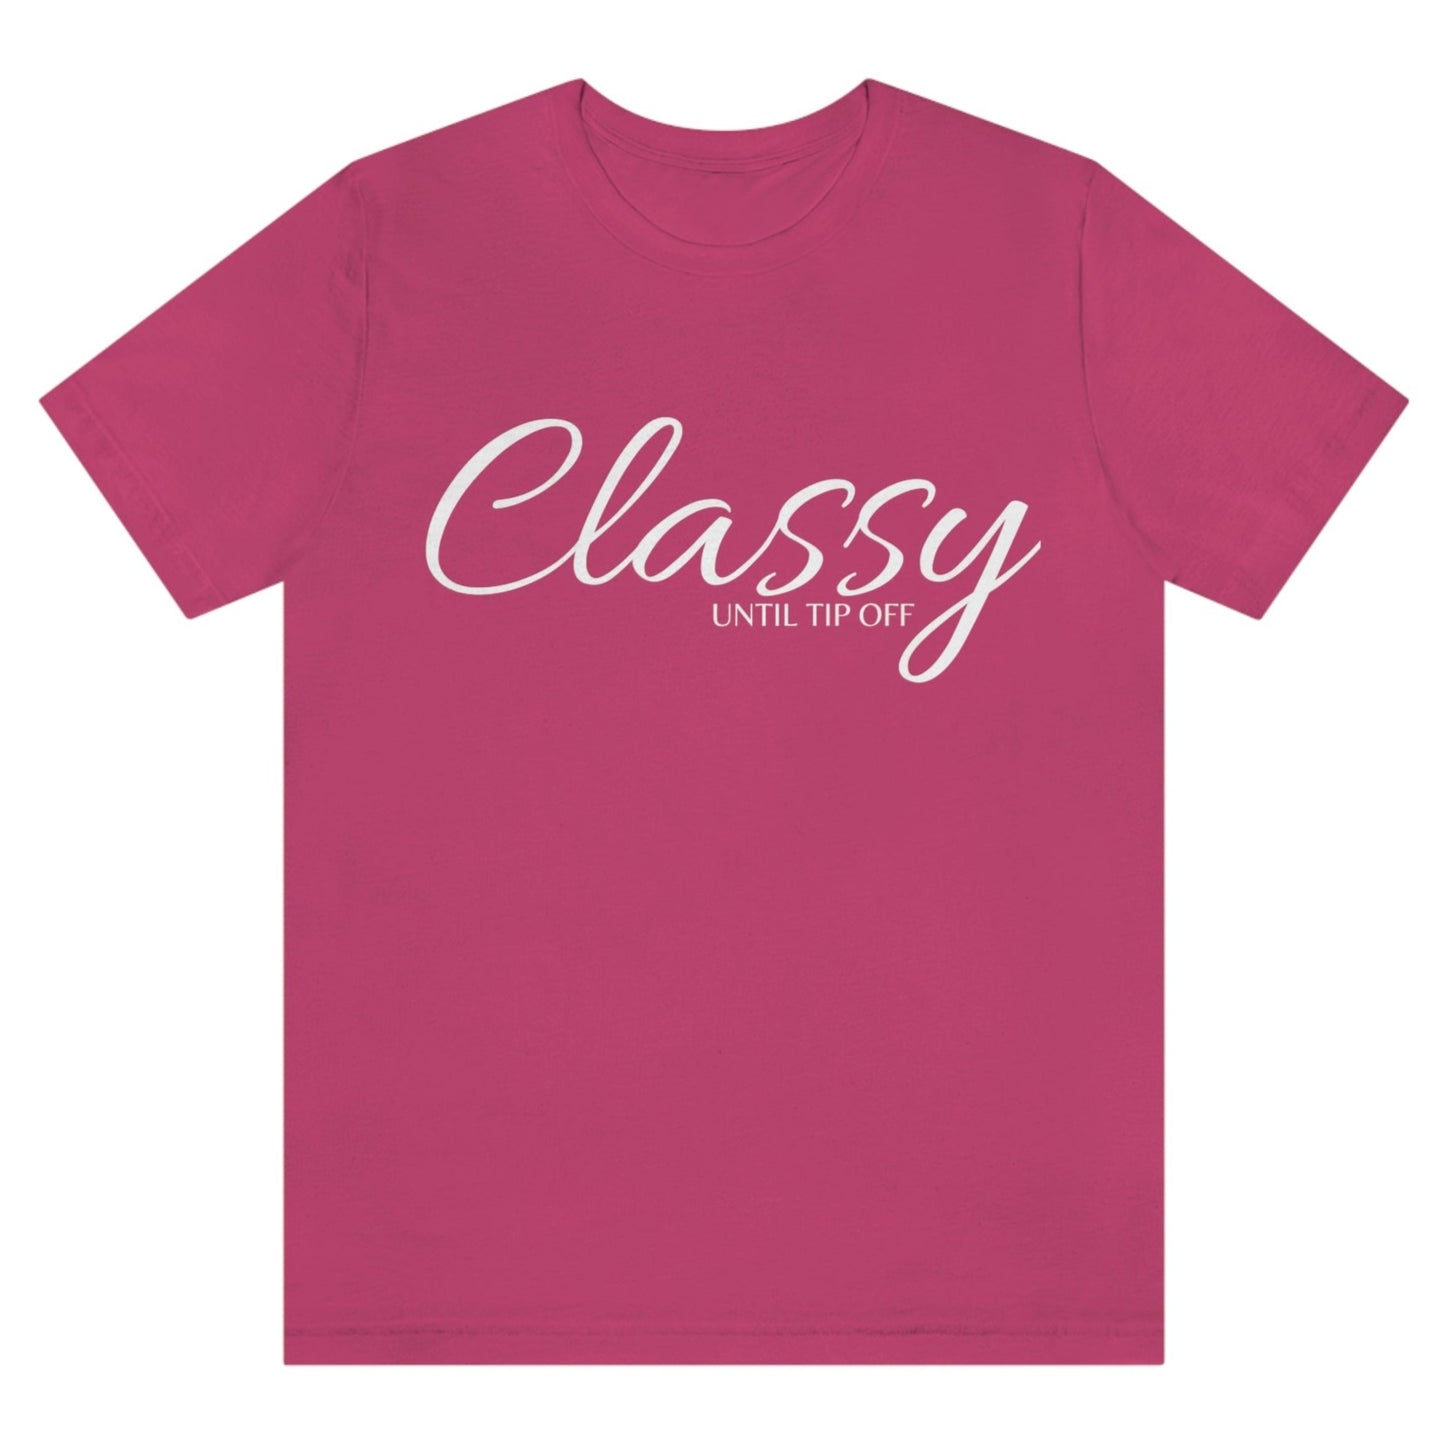 classy-until-tip-off-berry-t-shirt-basketball-womens